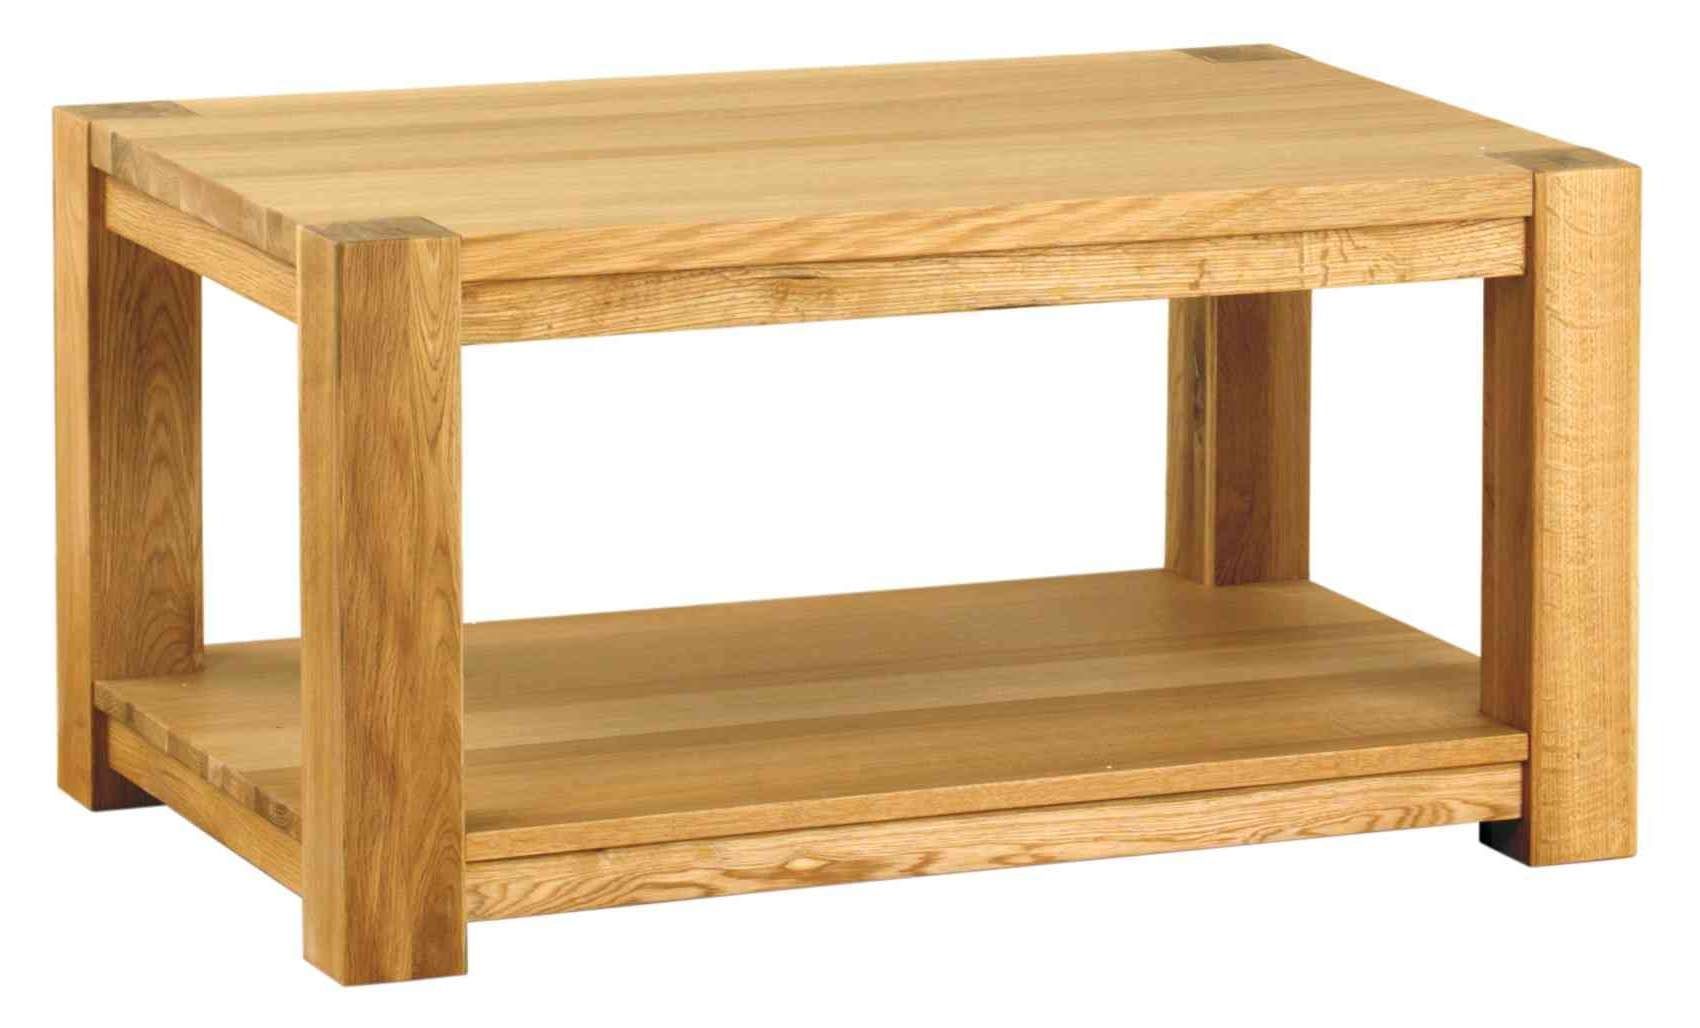 Trendy Chunky Oak Coffee Tables Intended For Modern Chunky Oak Coffee Table Medium (View 15 of 20)